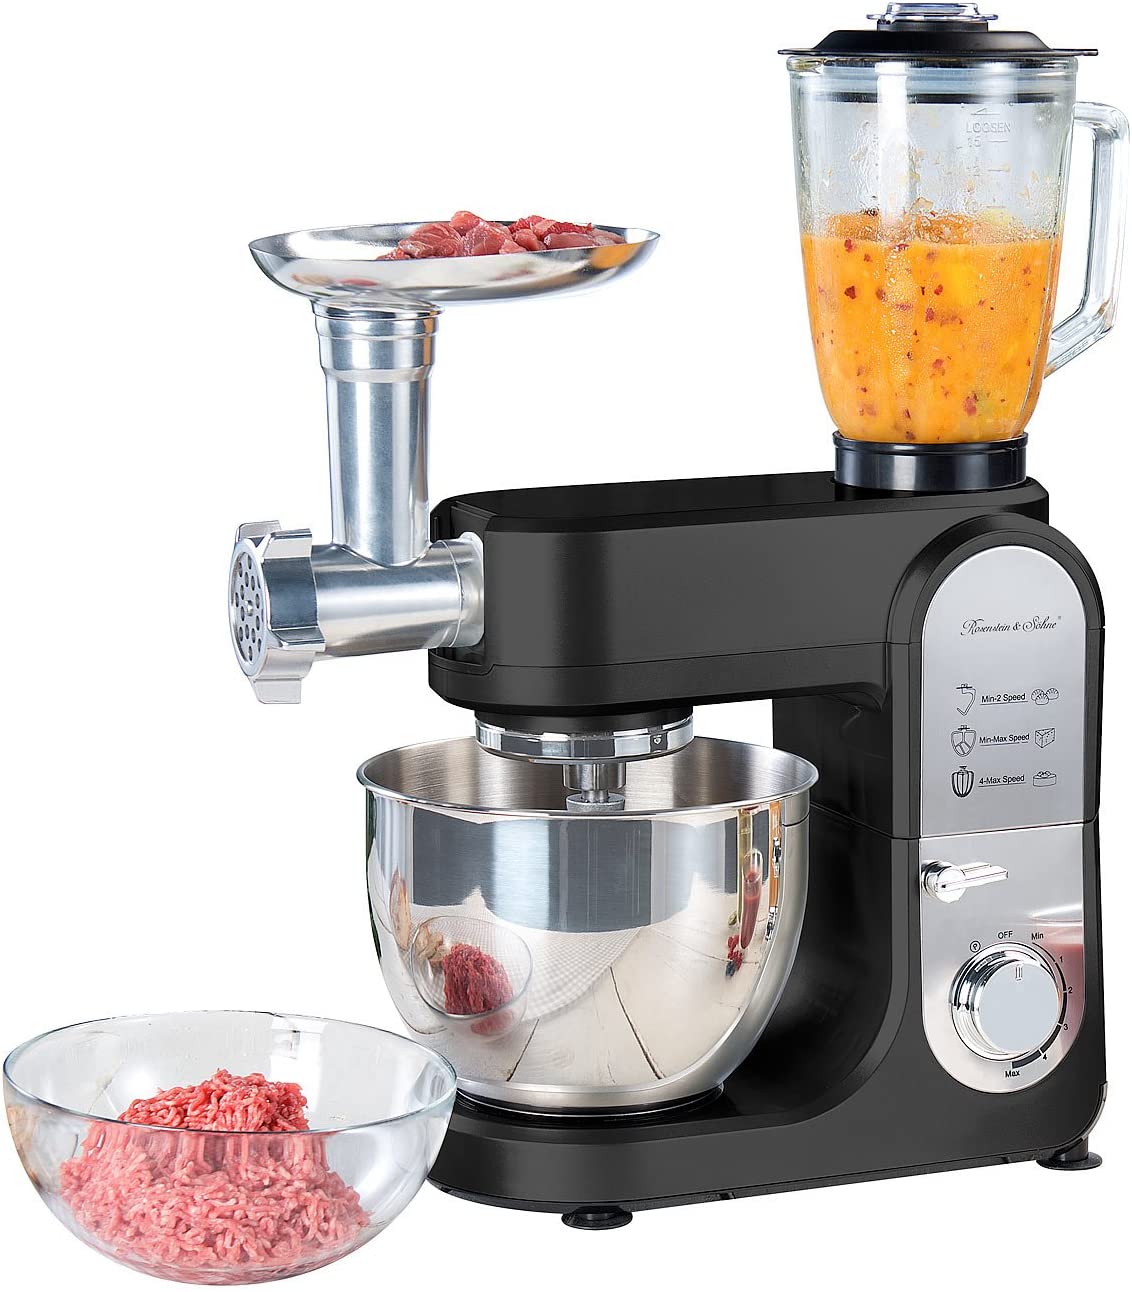 ROSENSTEIN & SOHNE Rosenstein & Söhne All in One Kitchen Appliance: All-in-One Food Processor with Meat Grinder and Mixer Attachment, 1000 Watts (Dough Kneading Machine)